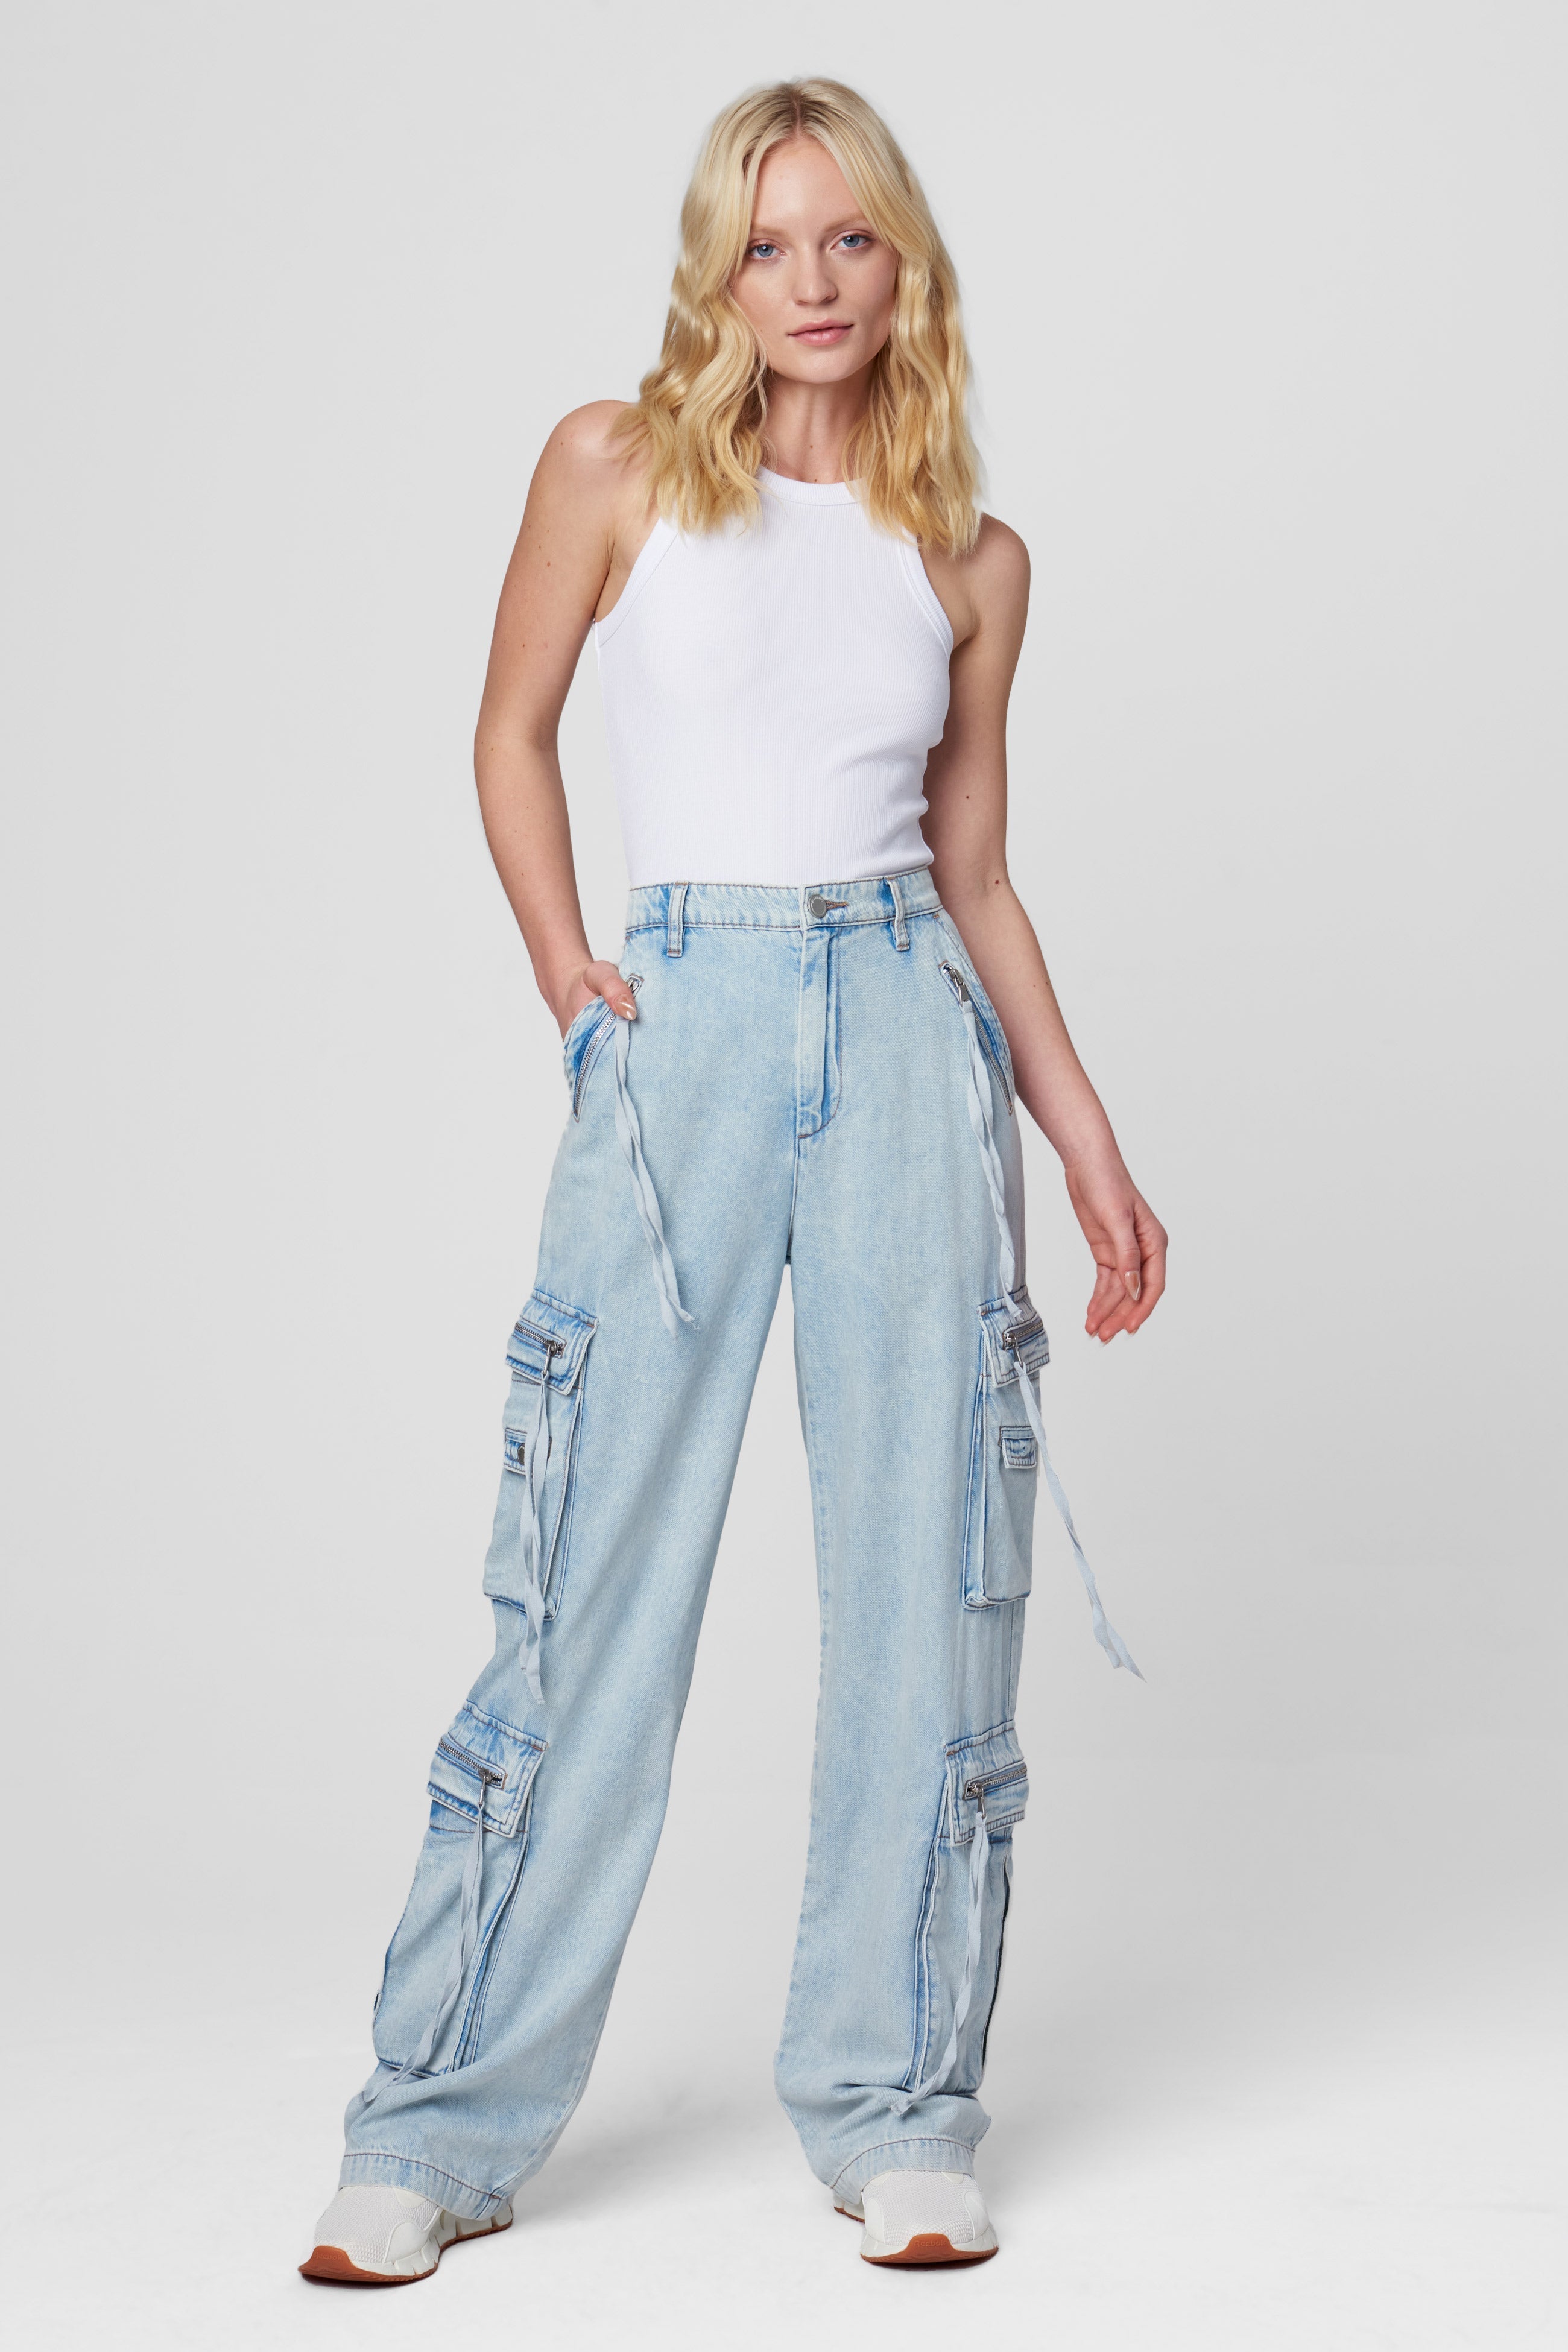 The Franklin In Blue Lagoon Pant | Blank NYC